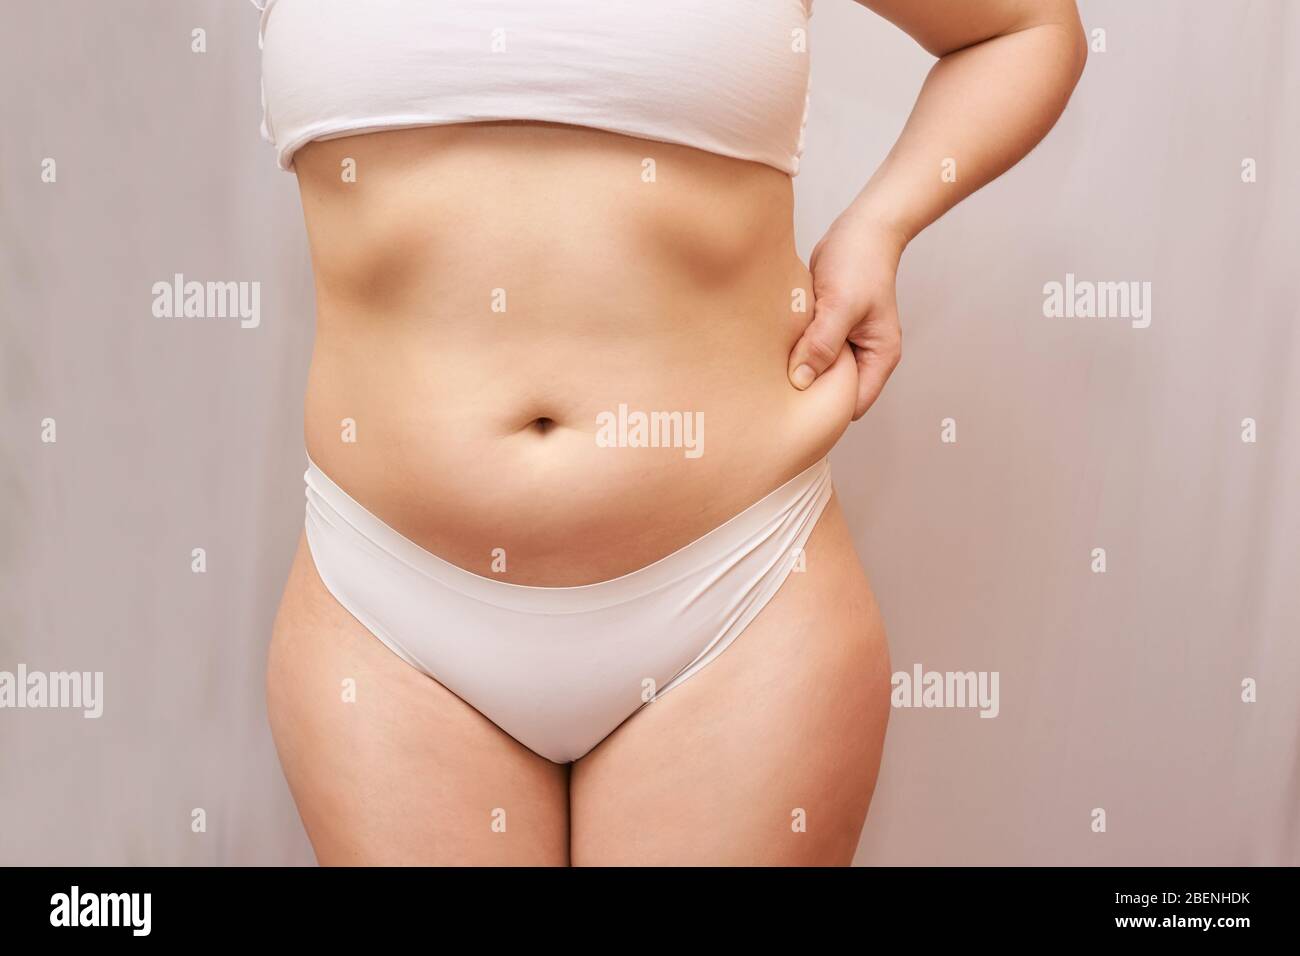 Fat unhealthy woman body. Pinch belly side. Measurement Stock Photo